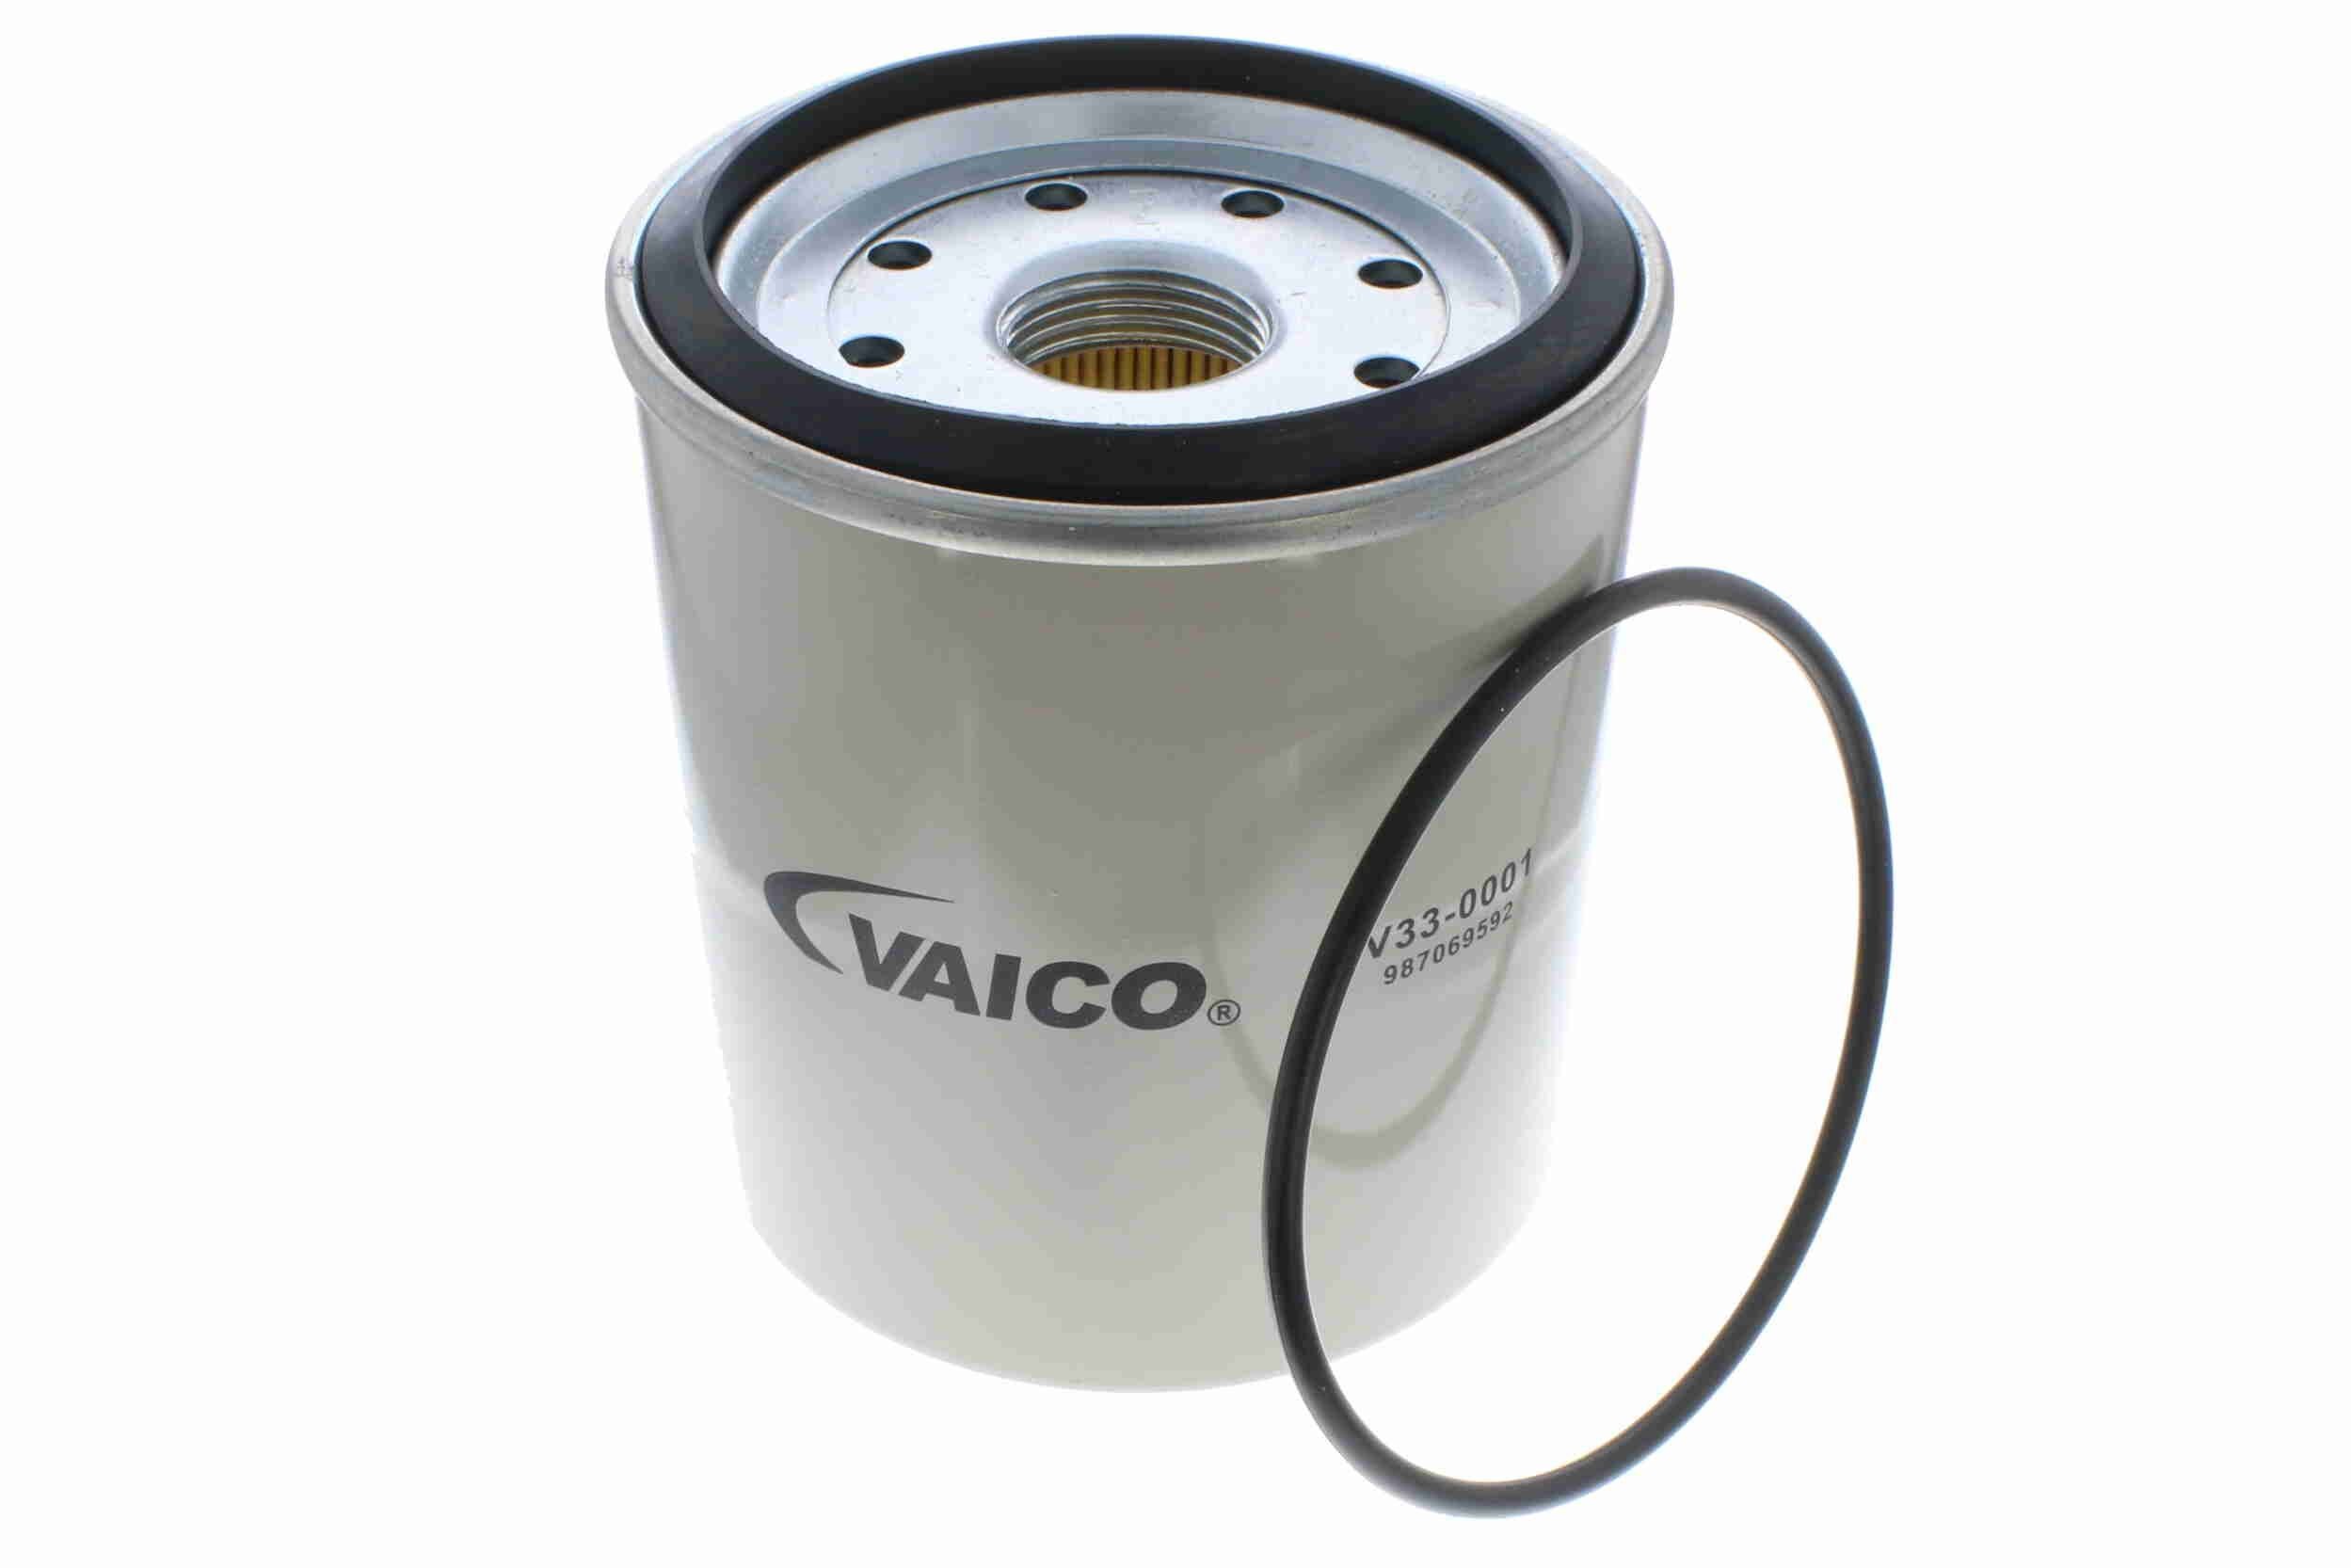 VAICO V33-0001 Fuel filter DODGE experience and price